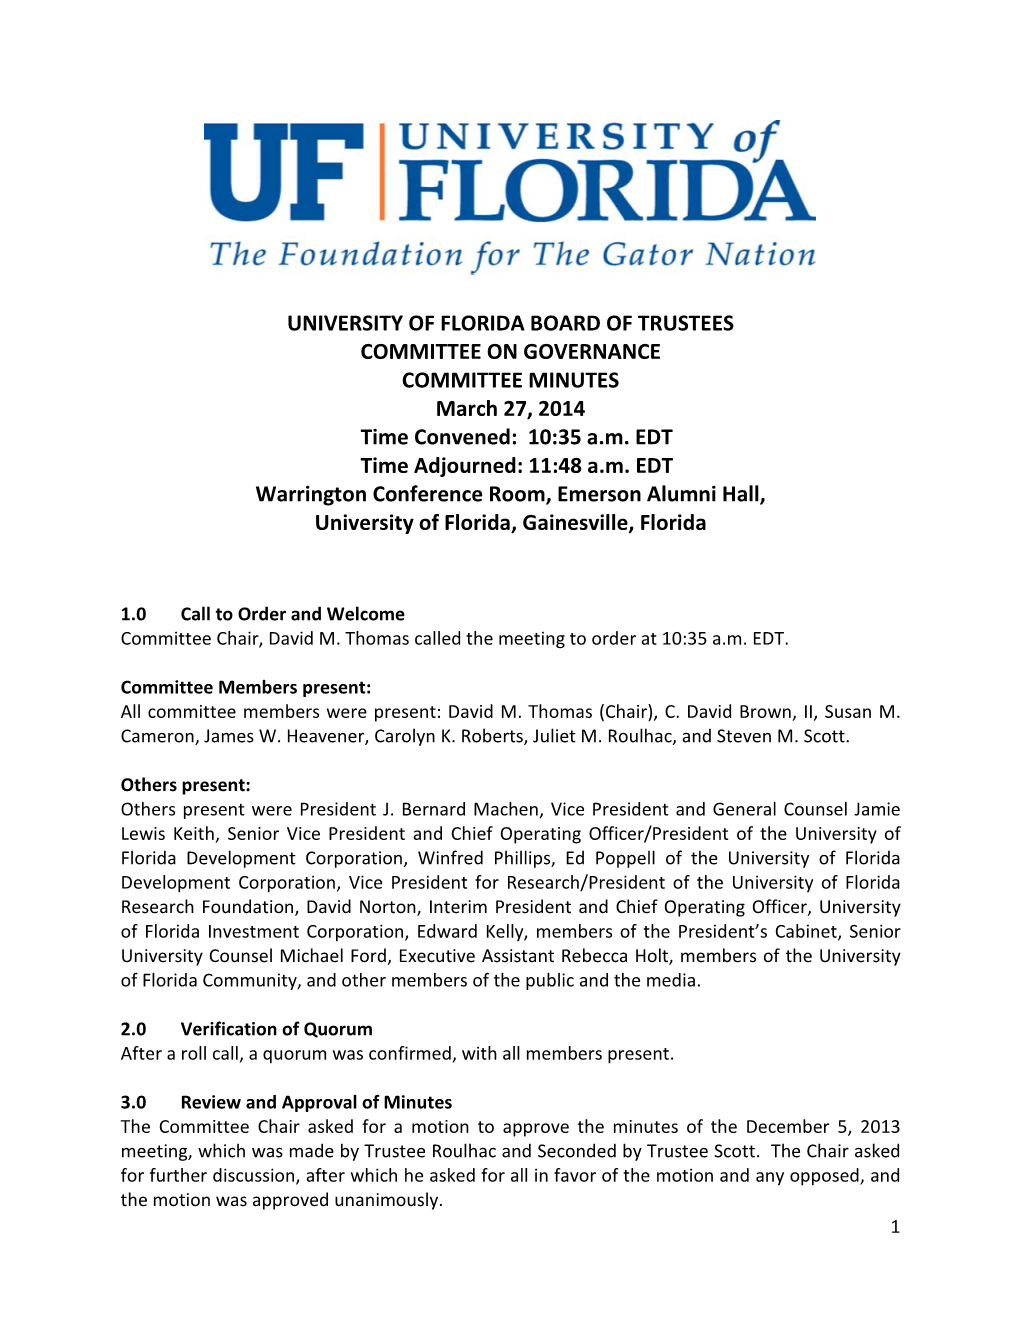 UNIVERSITY of FLORIDA BOARD of TRUSTEES COMMITTEE on GOVERNANCE COMMITTEE MINUTES March 27, 2014 Time Convened: 10:35 A.M